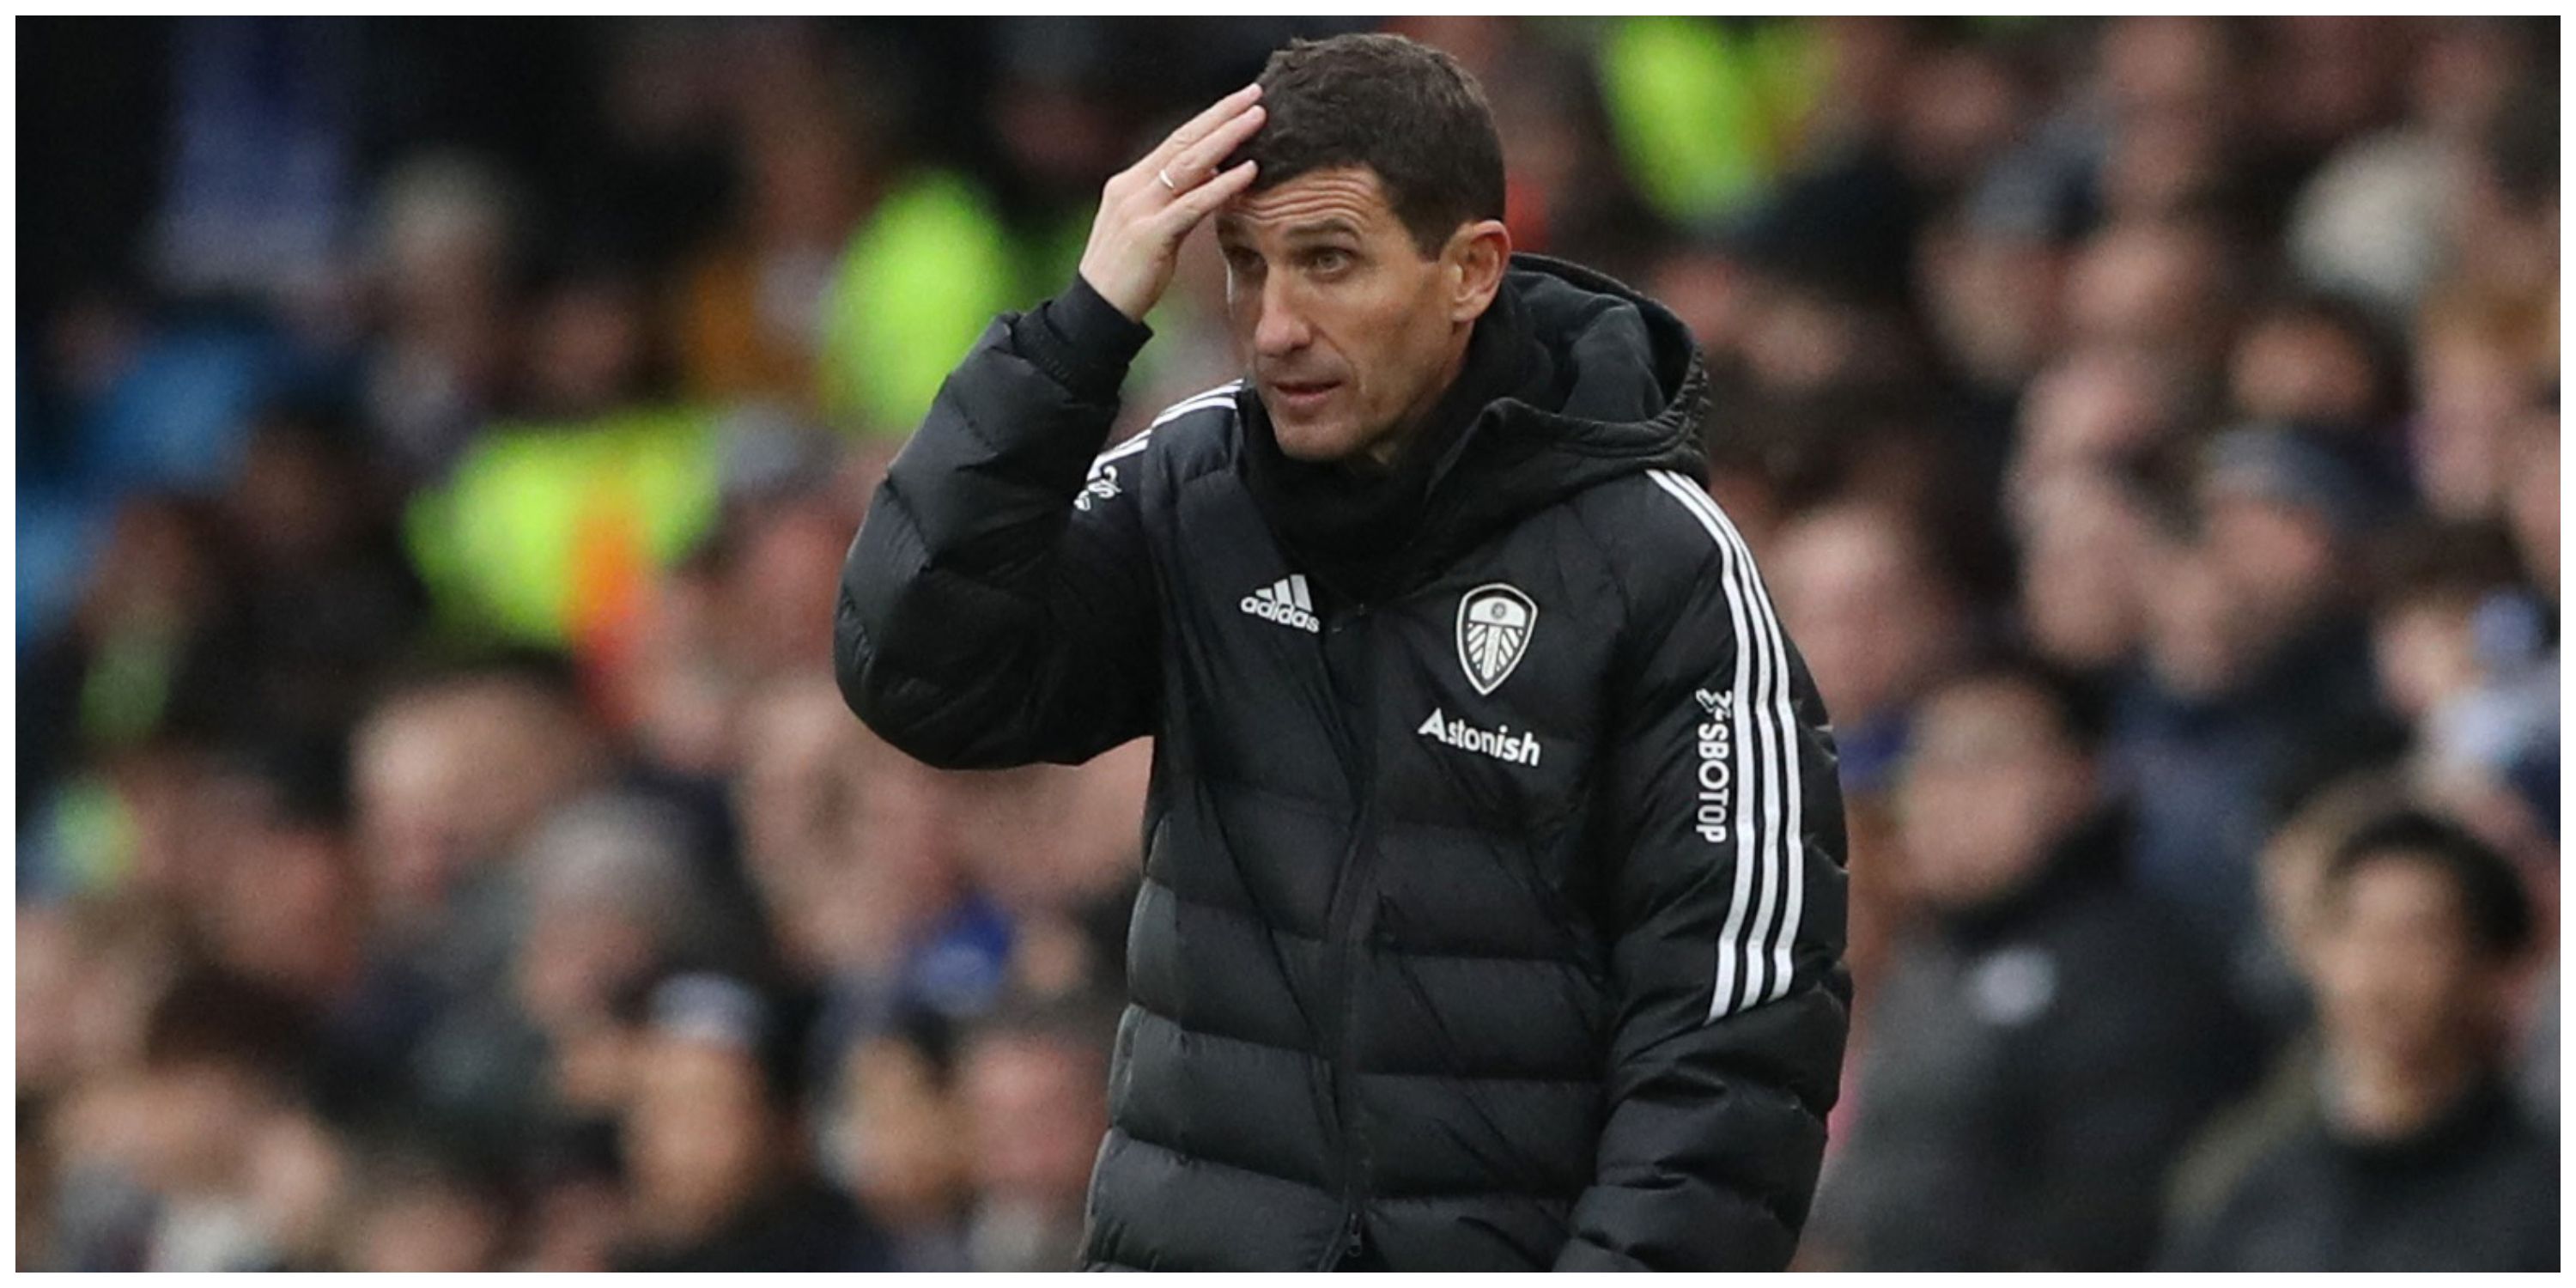 Leeds manager Javi Gracia with hand on his head